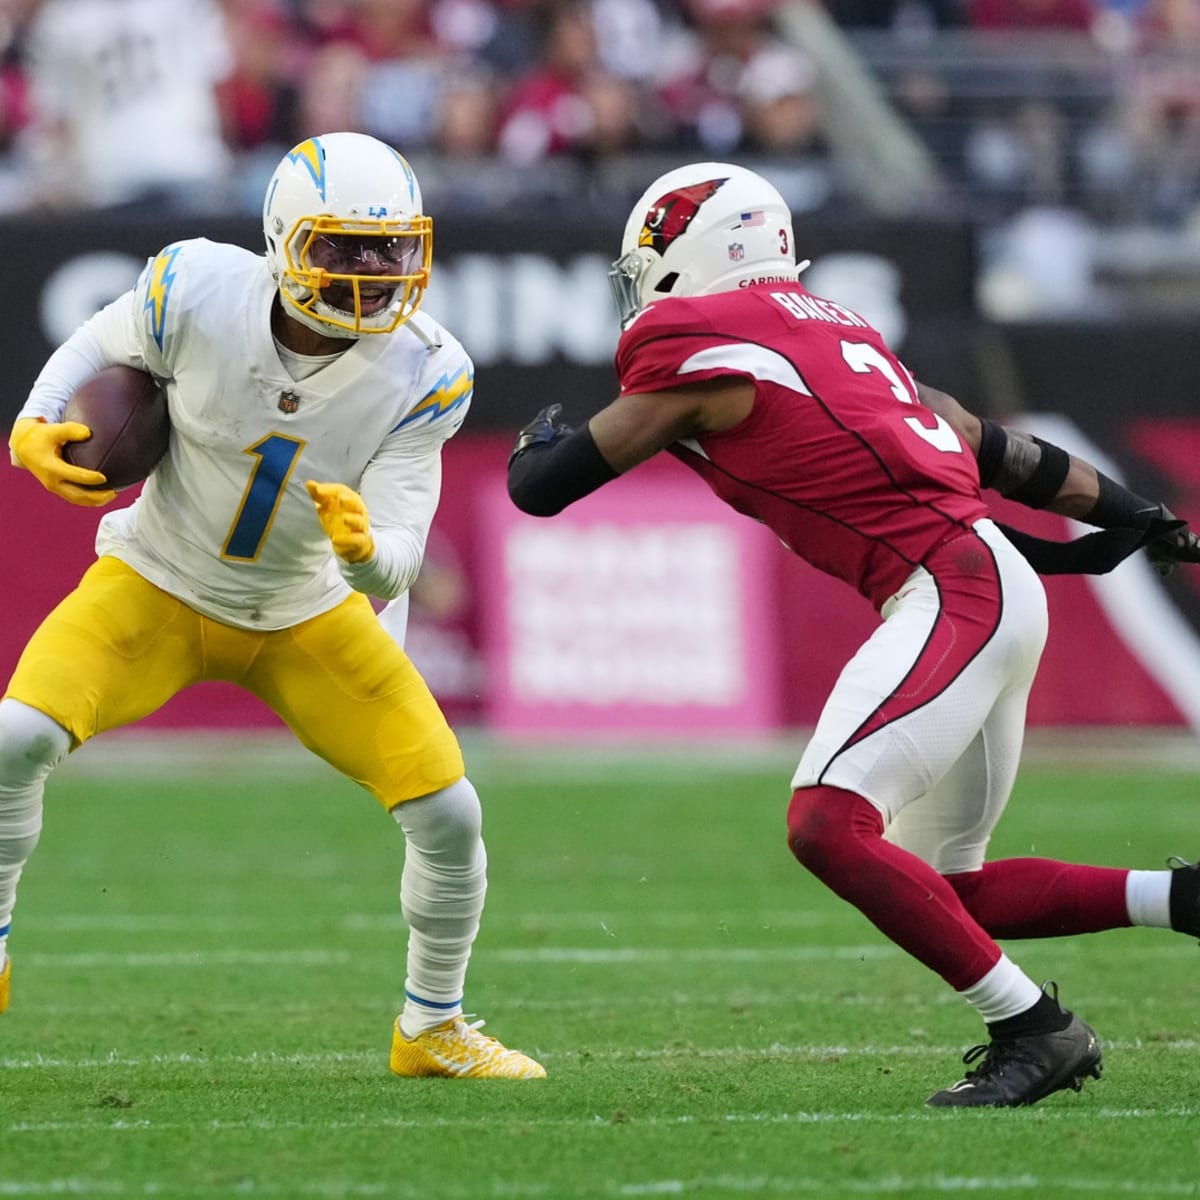 Scouting Report: Cardinals vs. Chargers